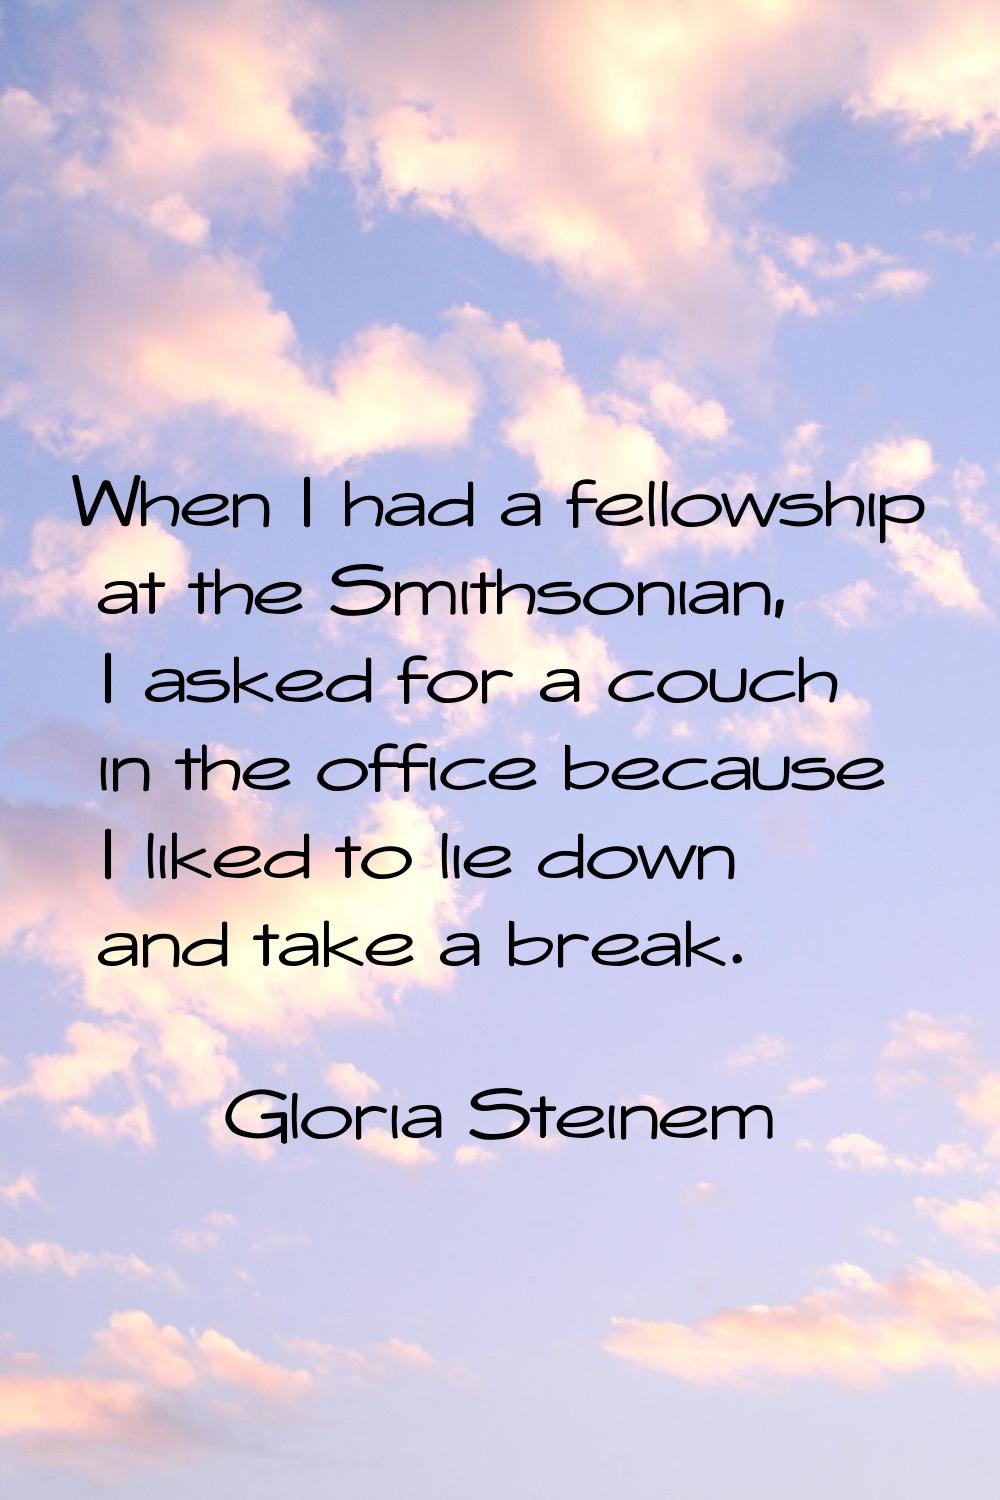 When I had a fellowship at the Smithsonian, I asked for a couch in the office because I liked to li